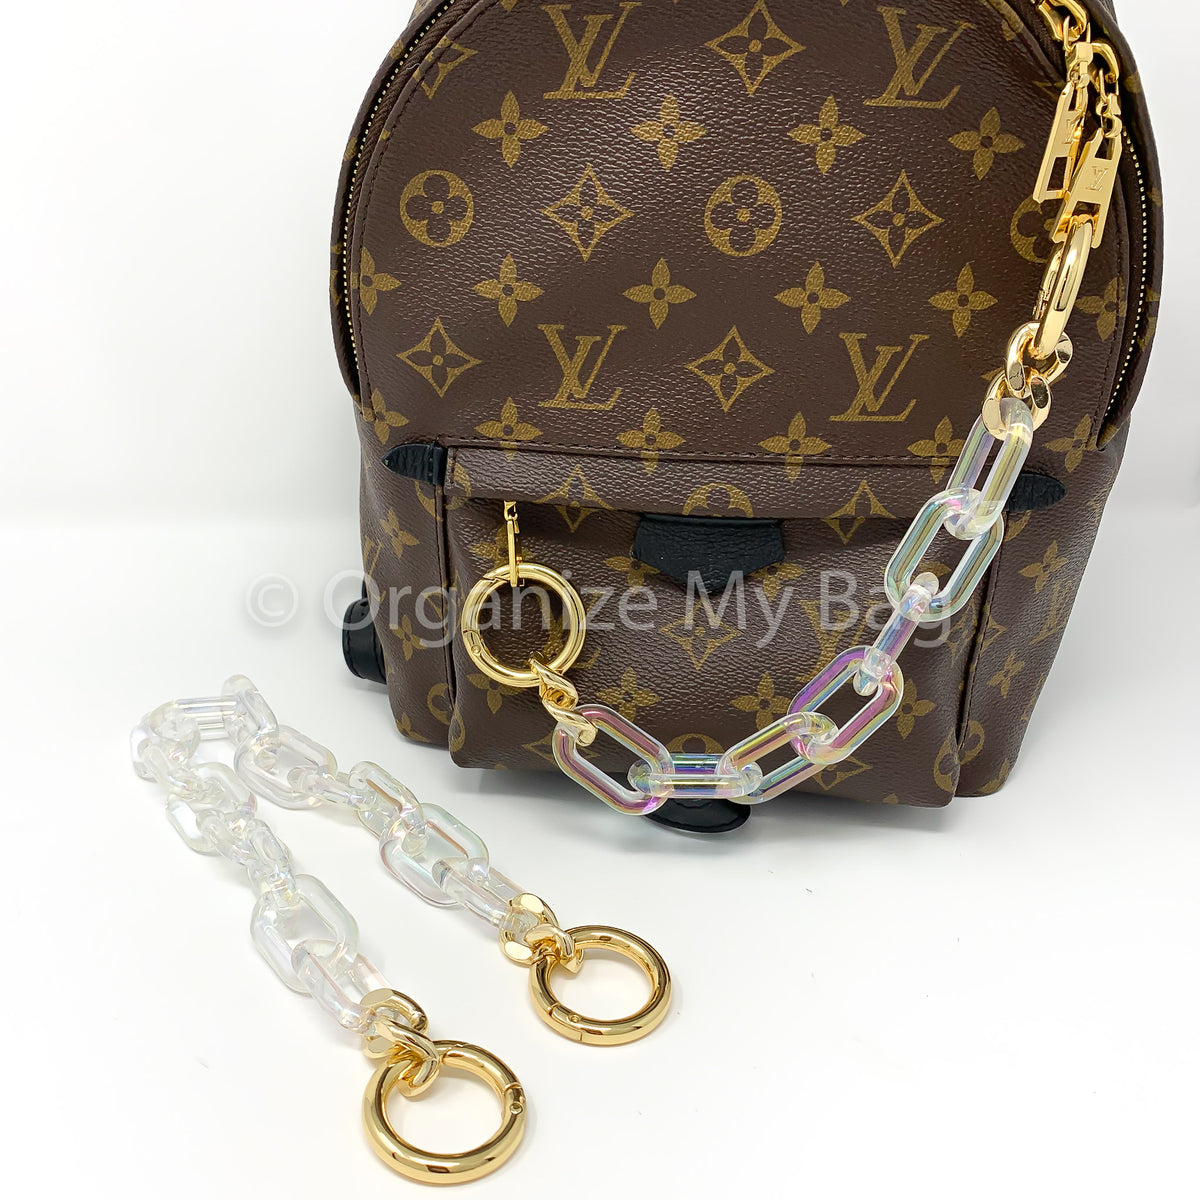 Unboxing the new Louis Vuitton highrise bumbag. I wasnt sure if id